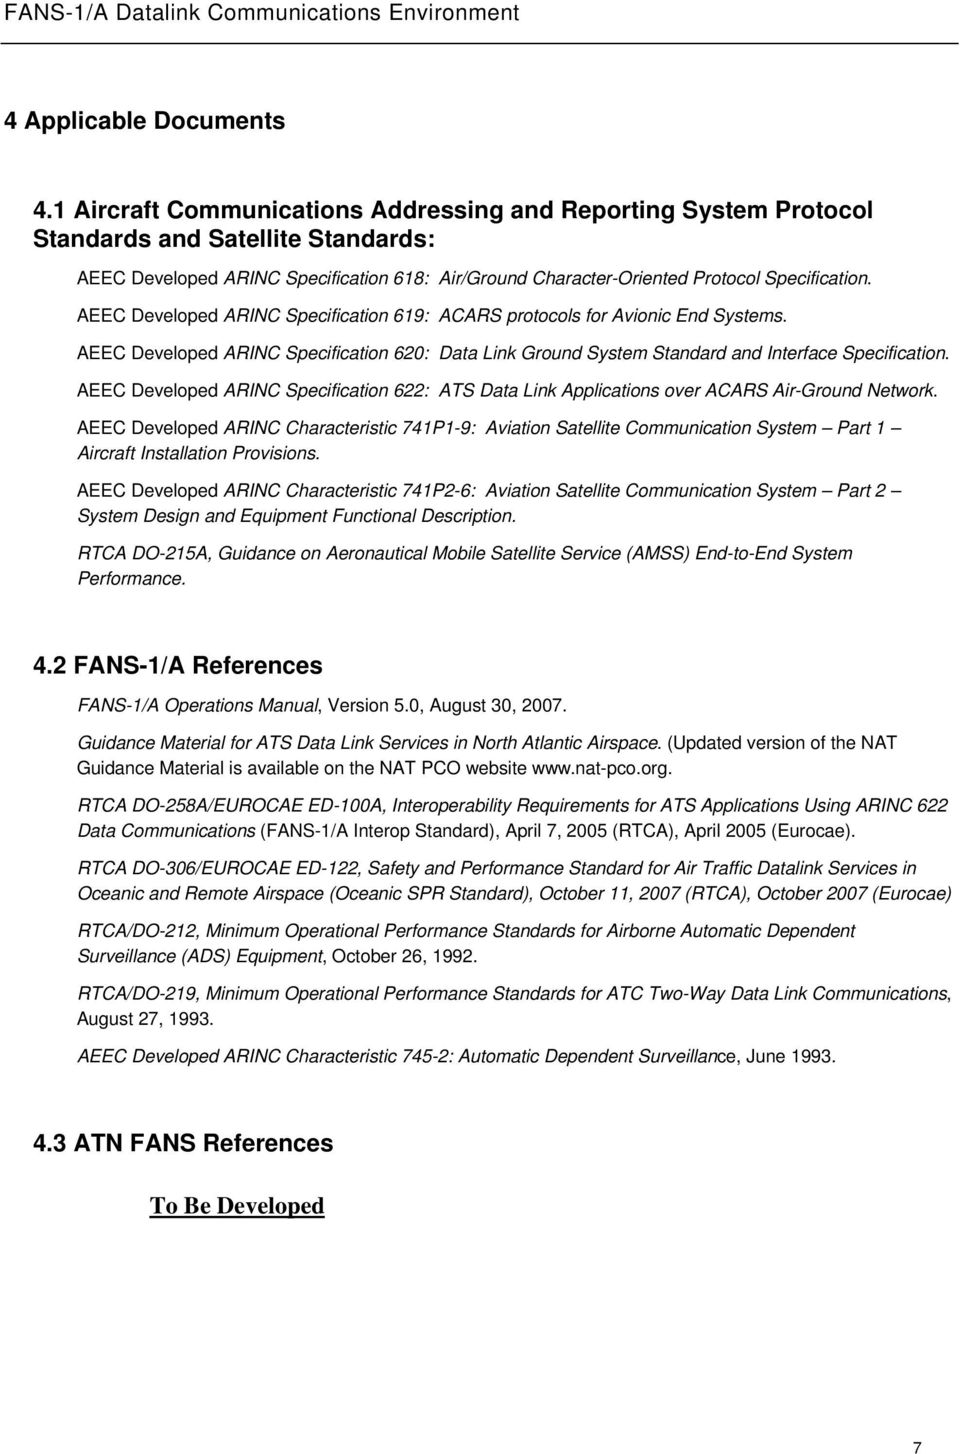 AEEC Developed ARINC Specification 619: ACARS protocols for Avionic End Systems. AEEC Developed ARINC Specification 620: Data Link Ground System Standard and Interface Specification.